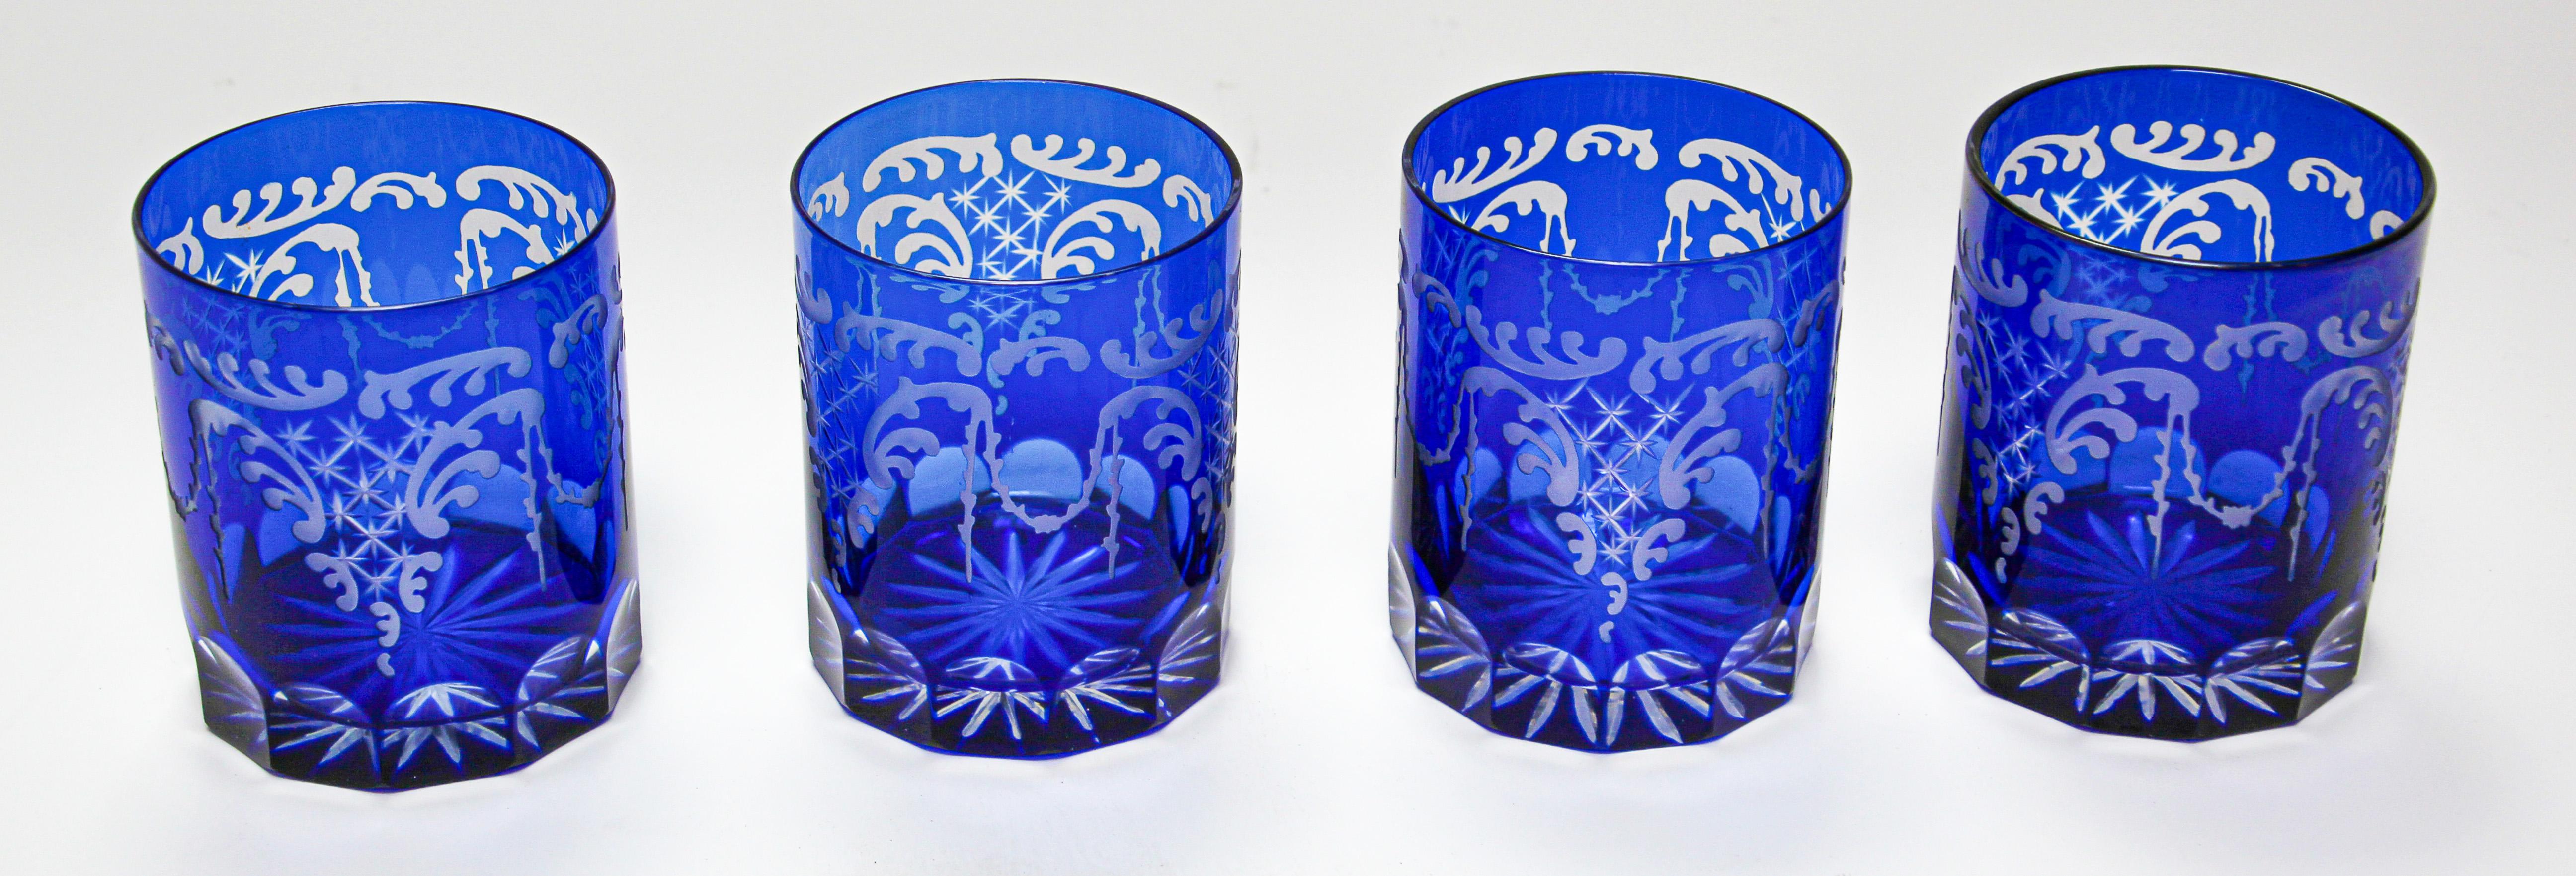 Set of four whiskey glasses tumbler cobalt blue crystal Baccarat style. 
The vibrant hand blown rich sapphire blue jewel sapphire blue crystal glass is cut to clear to reveal a lovely pattern with clean lines. 
Set of four rock whiskey or water